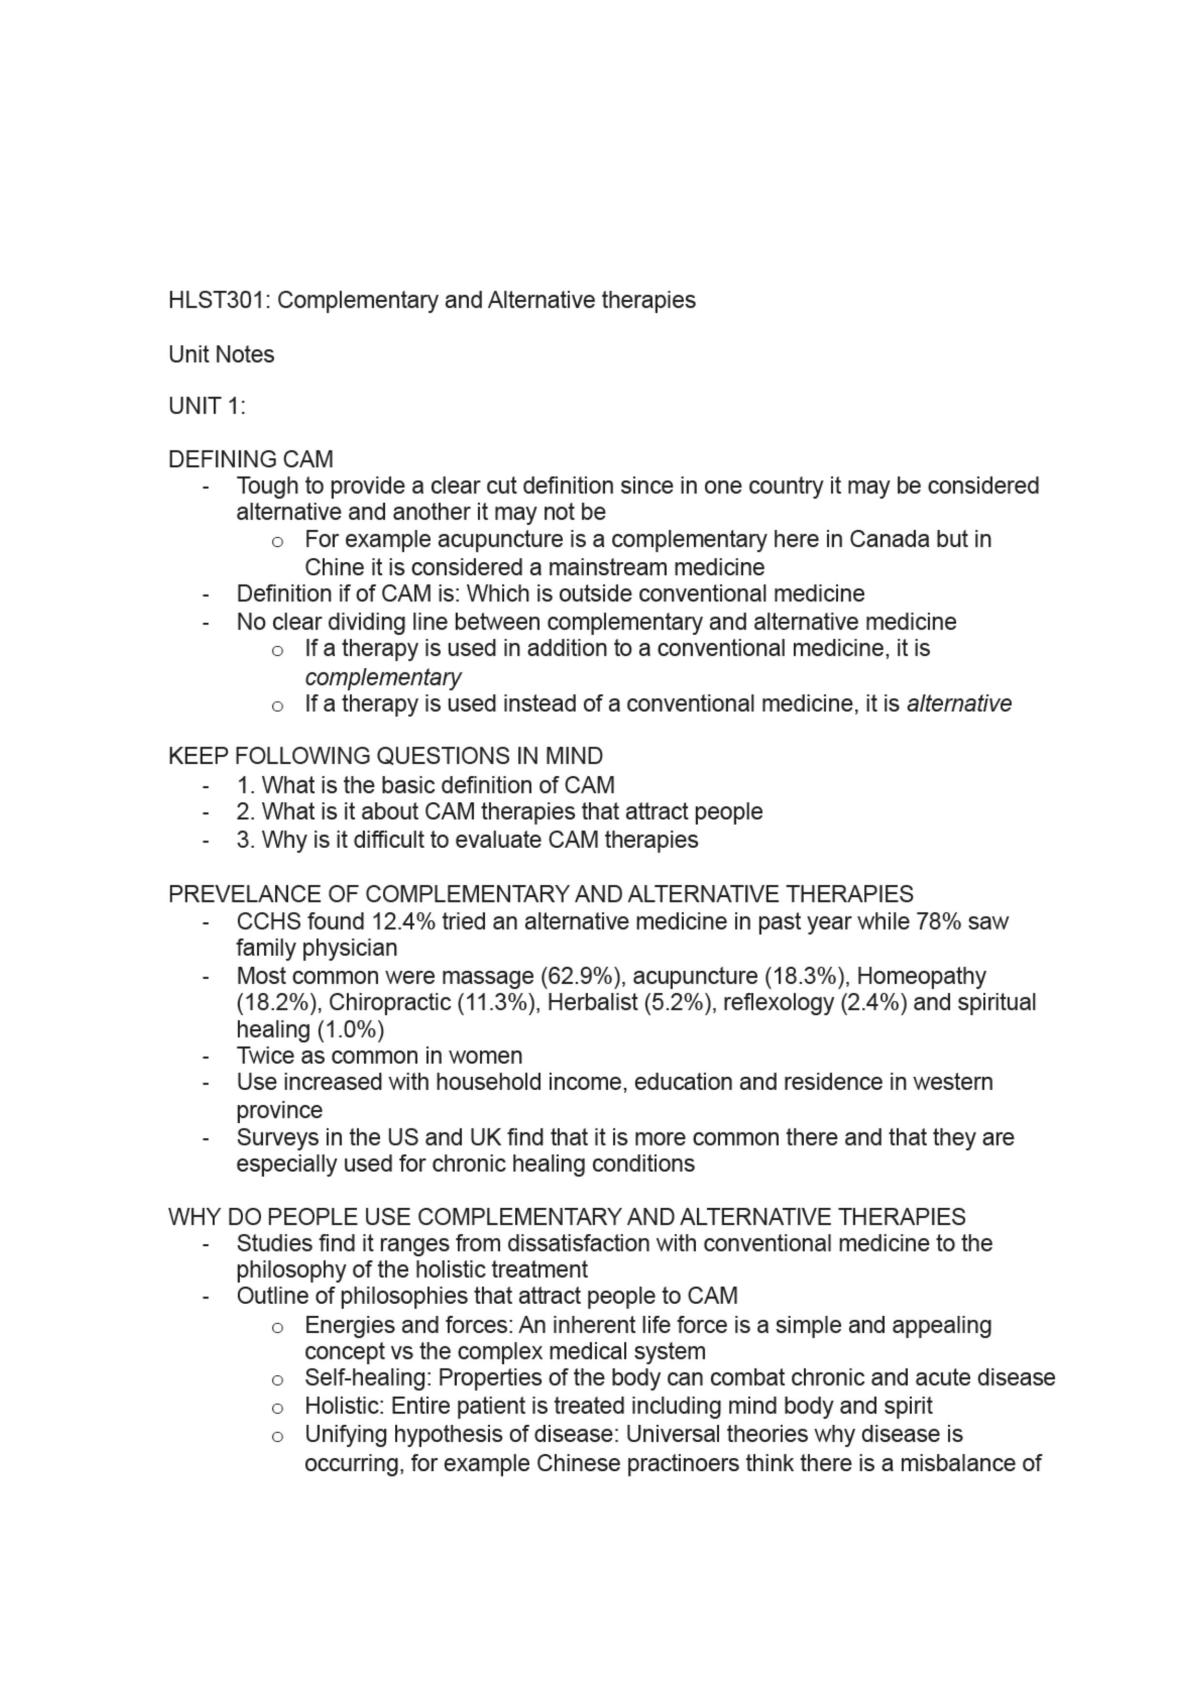 Complementary and Alternative Therapies Study Notes - Page 1